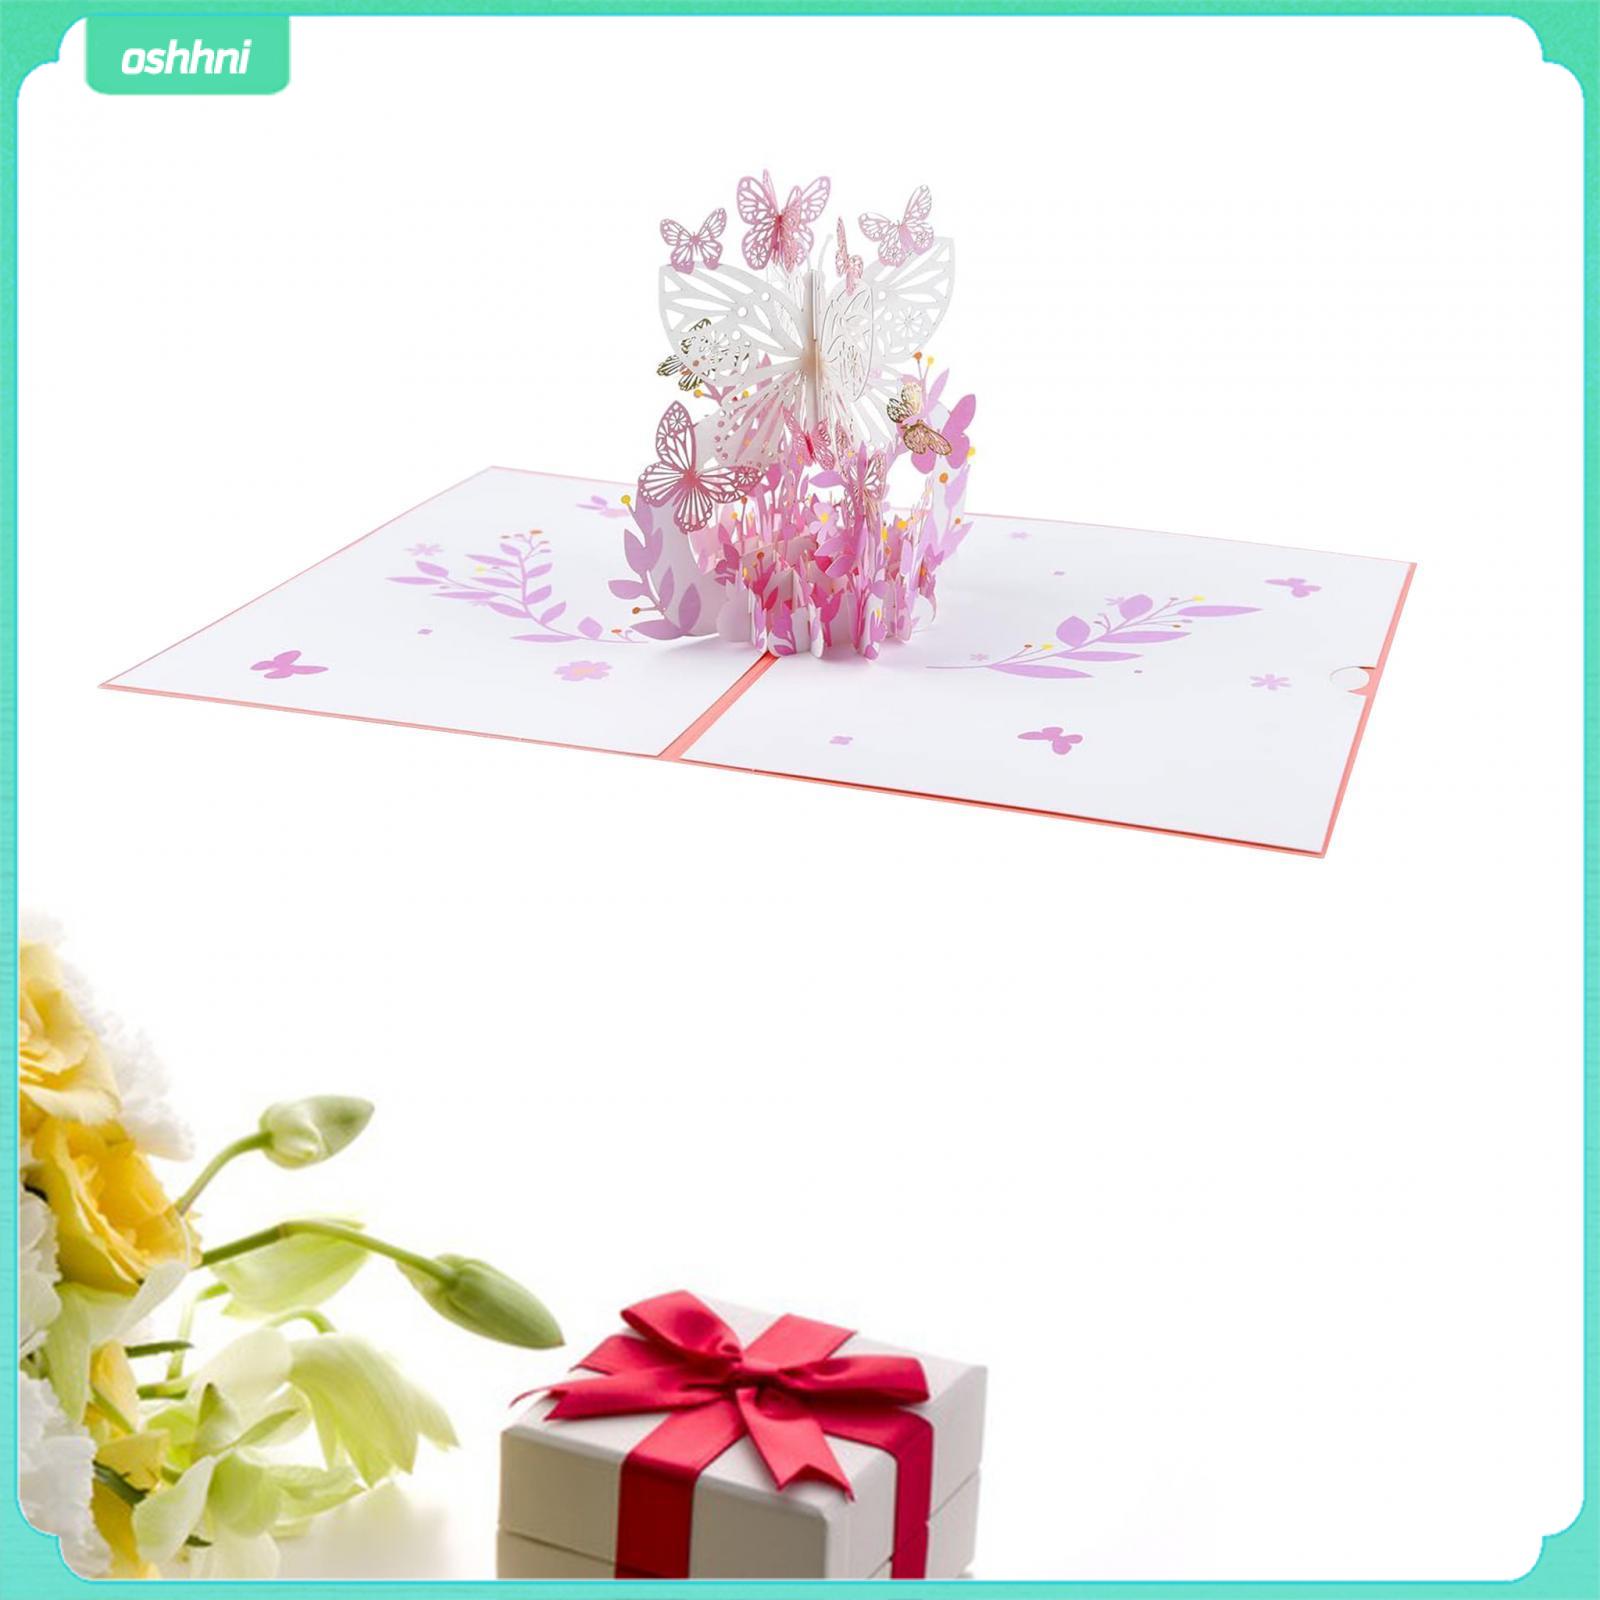 oshhni 3D Greeting Card Paper Card for Valentines Day Mother s Day